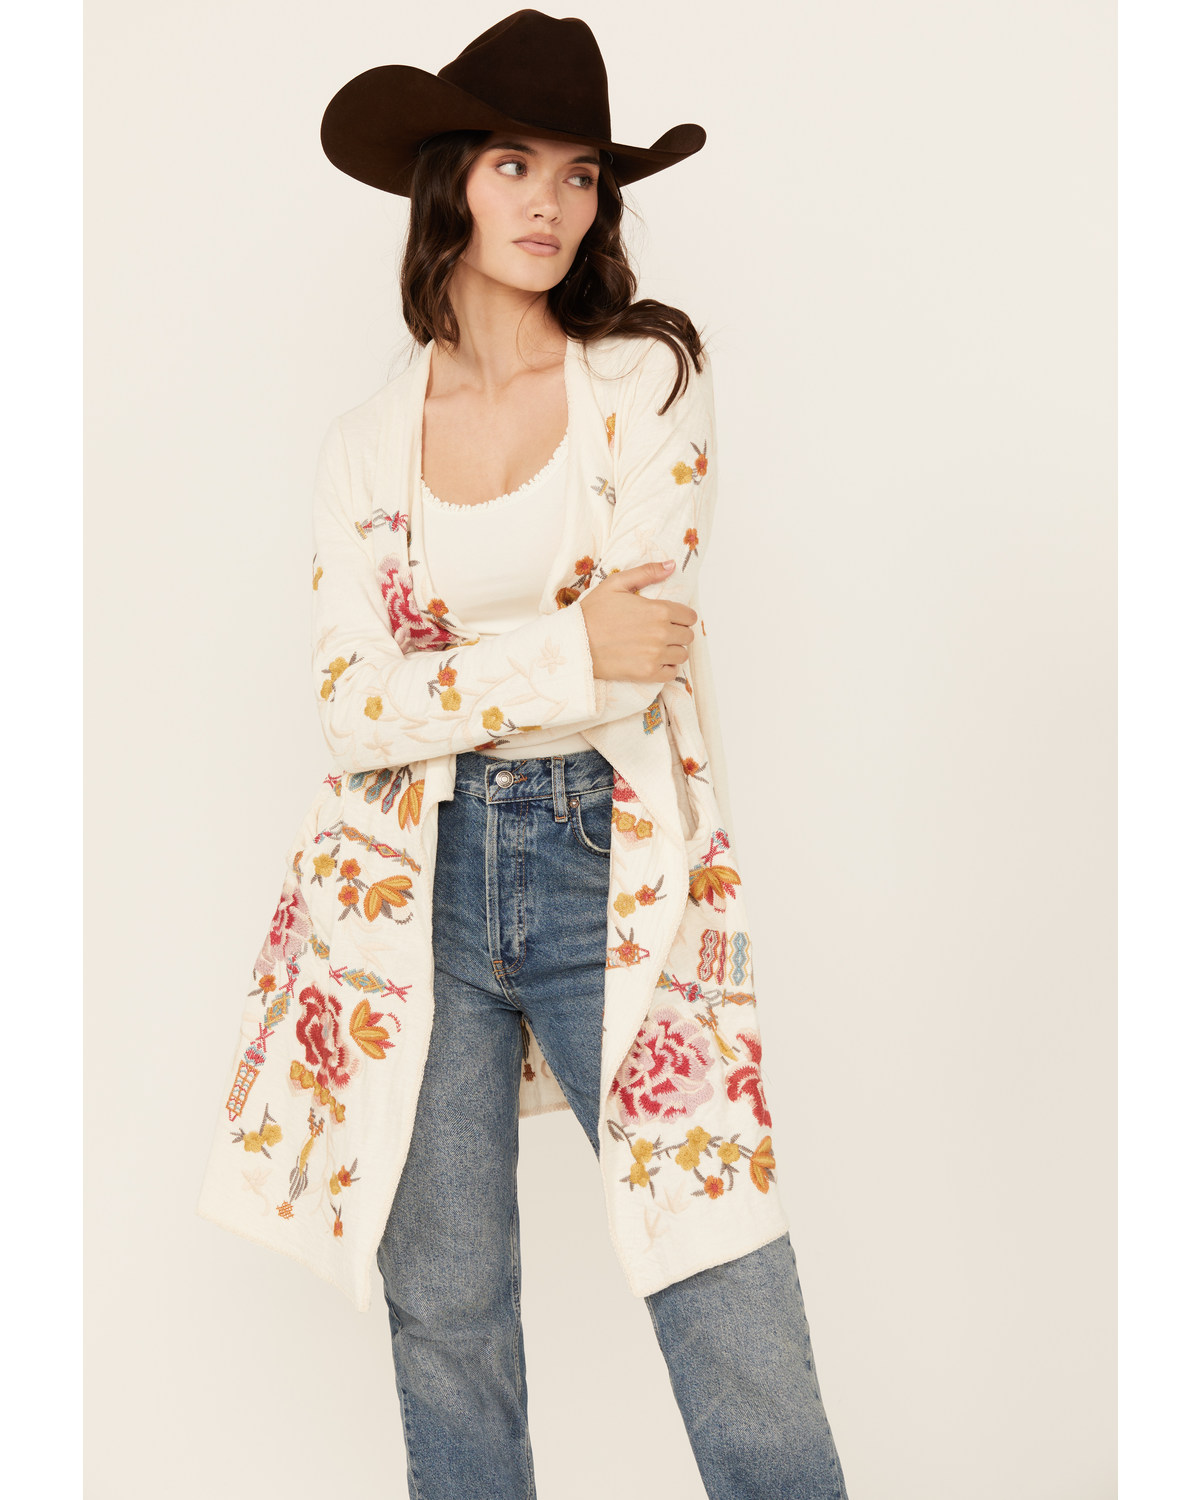 Johnny Was Women's Floral Embroidered Cardigan